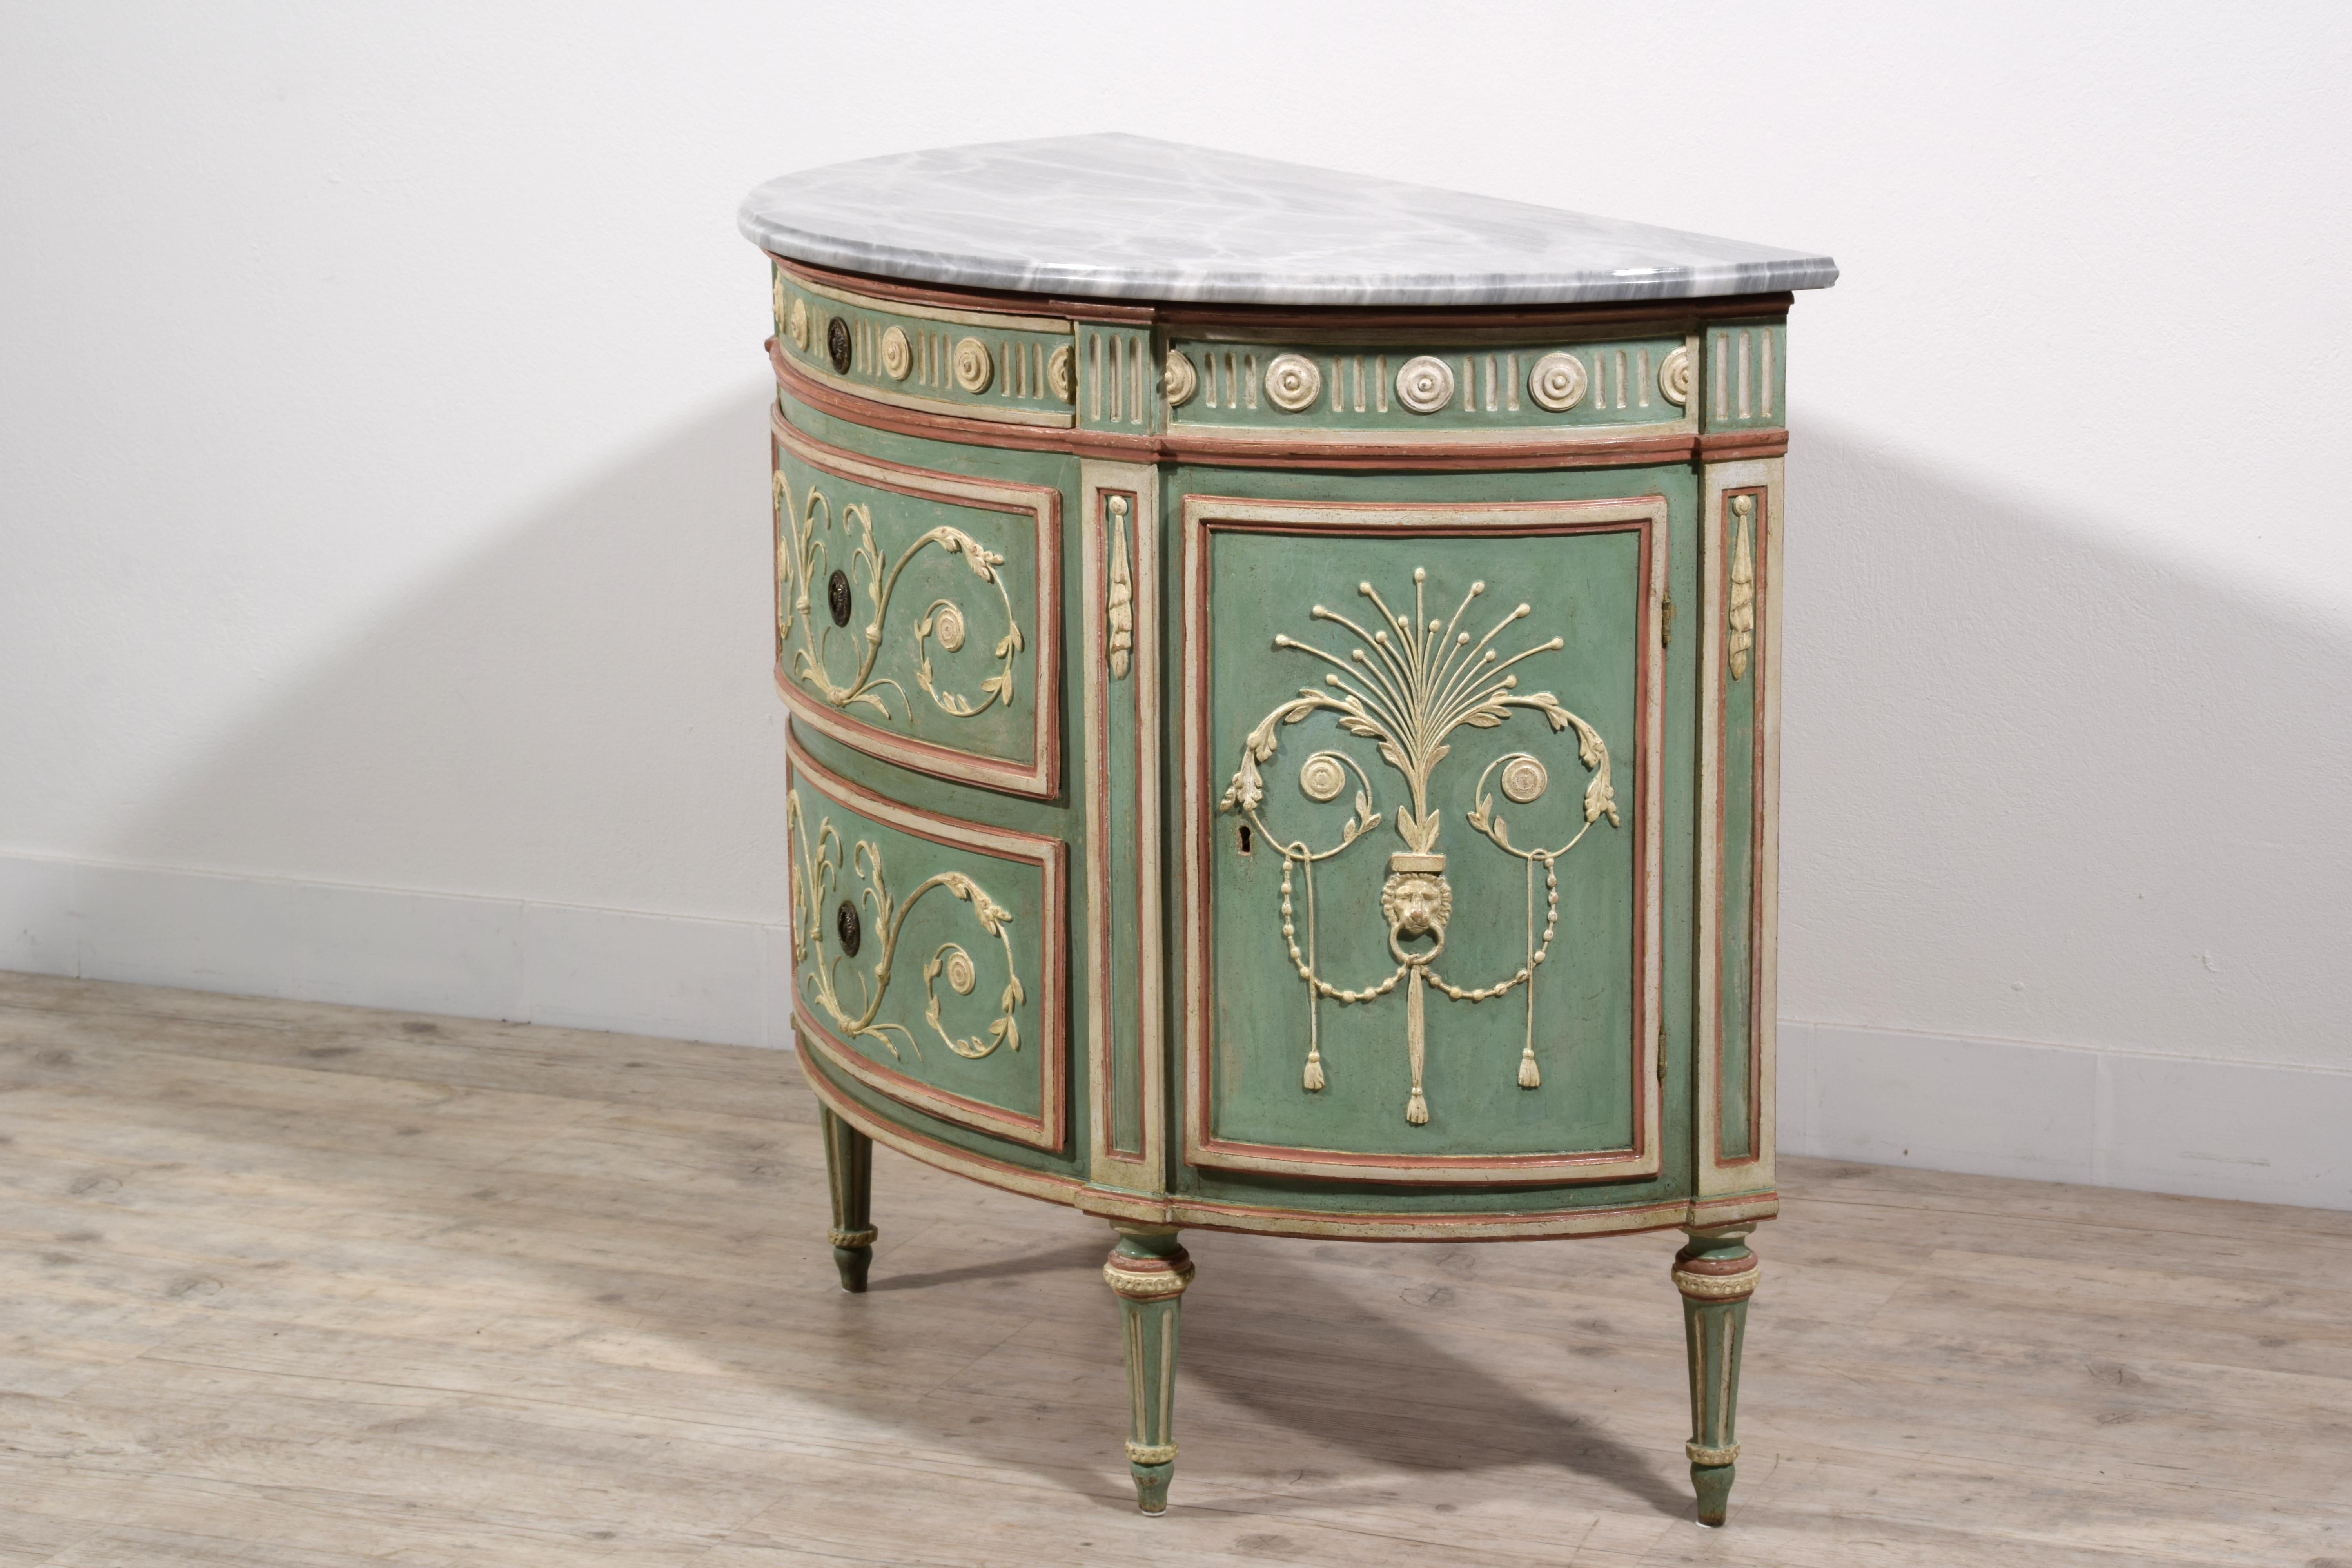 18th century, Italian Half-moon Lacquered Wood Chest of Drawers For Sale 9